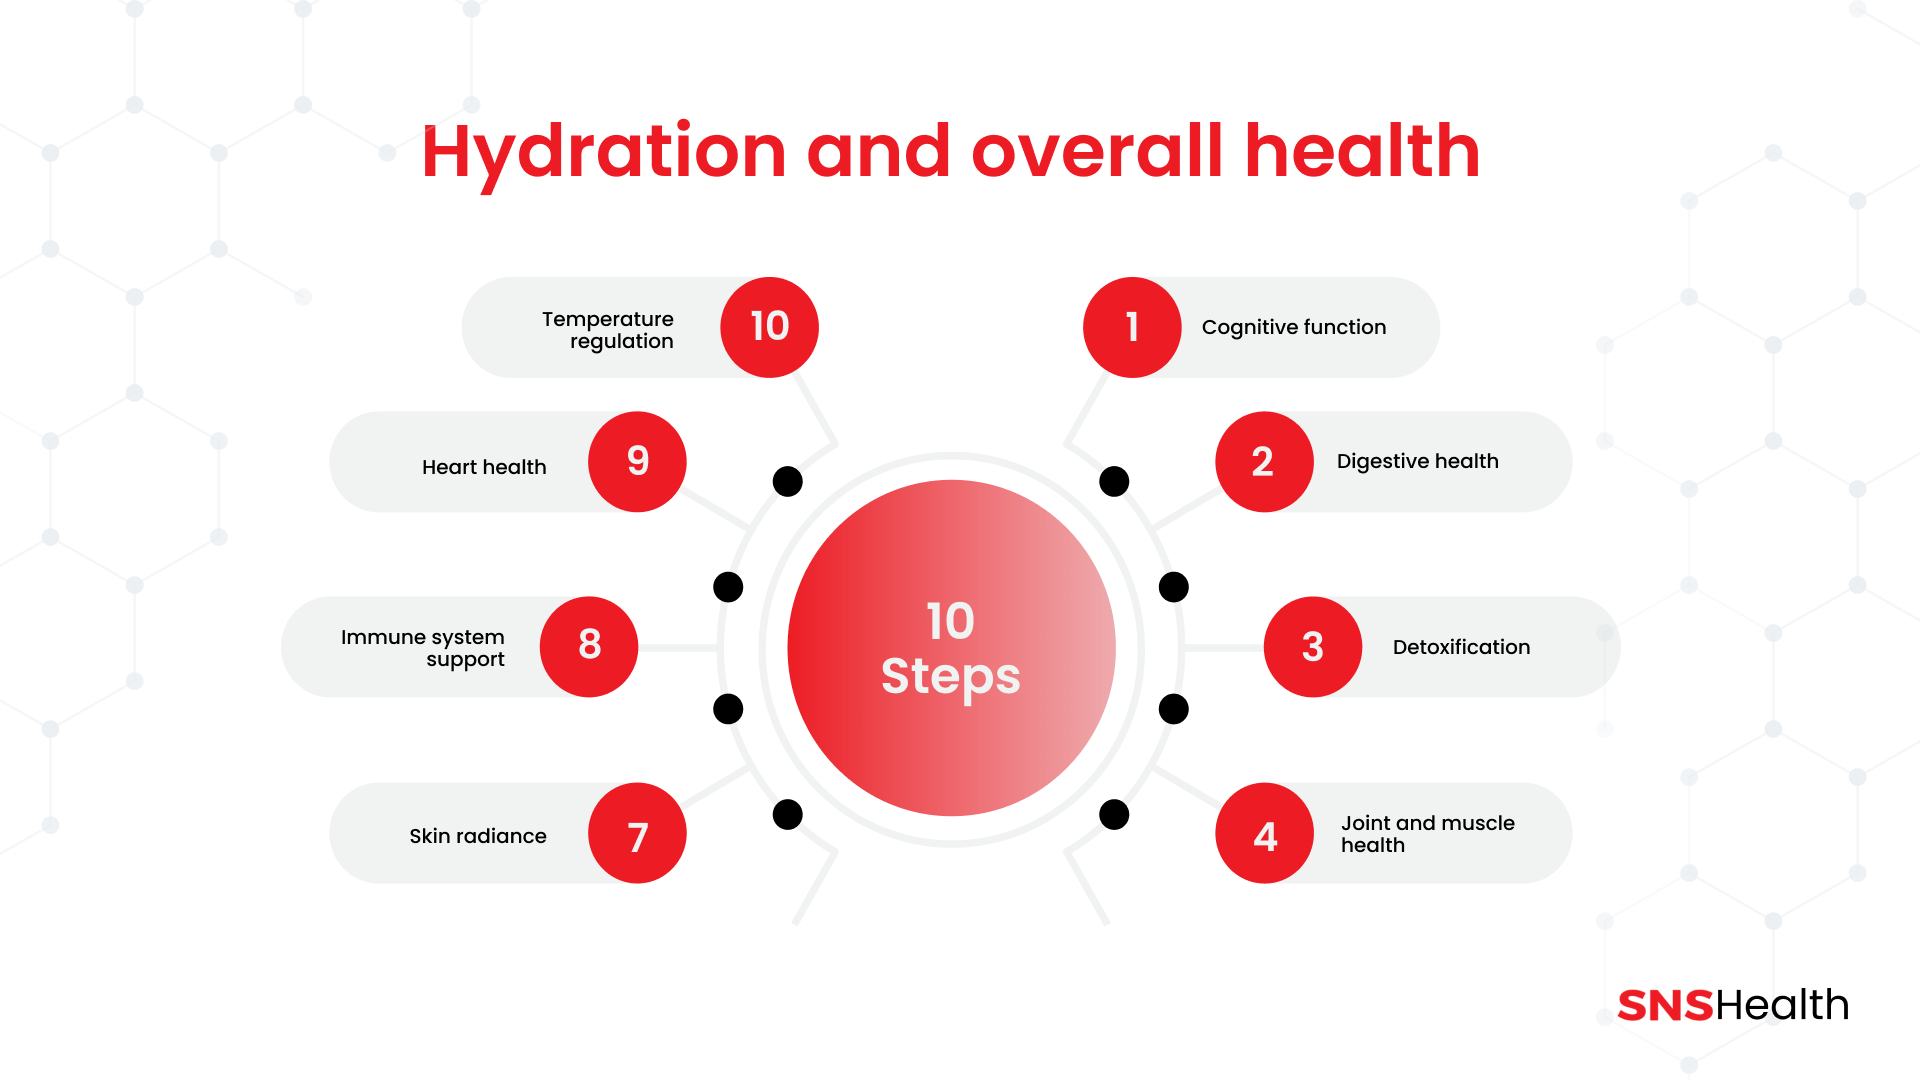 Hydration and overall health